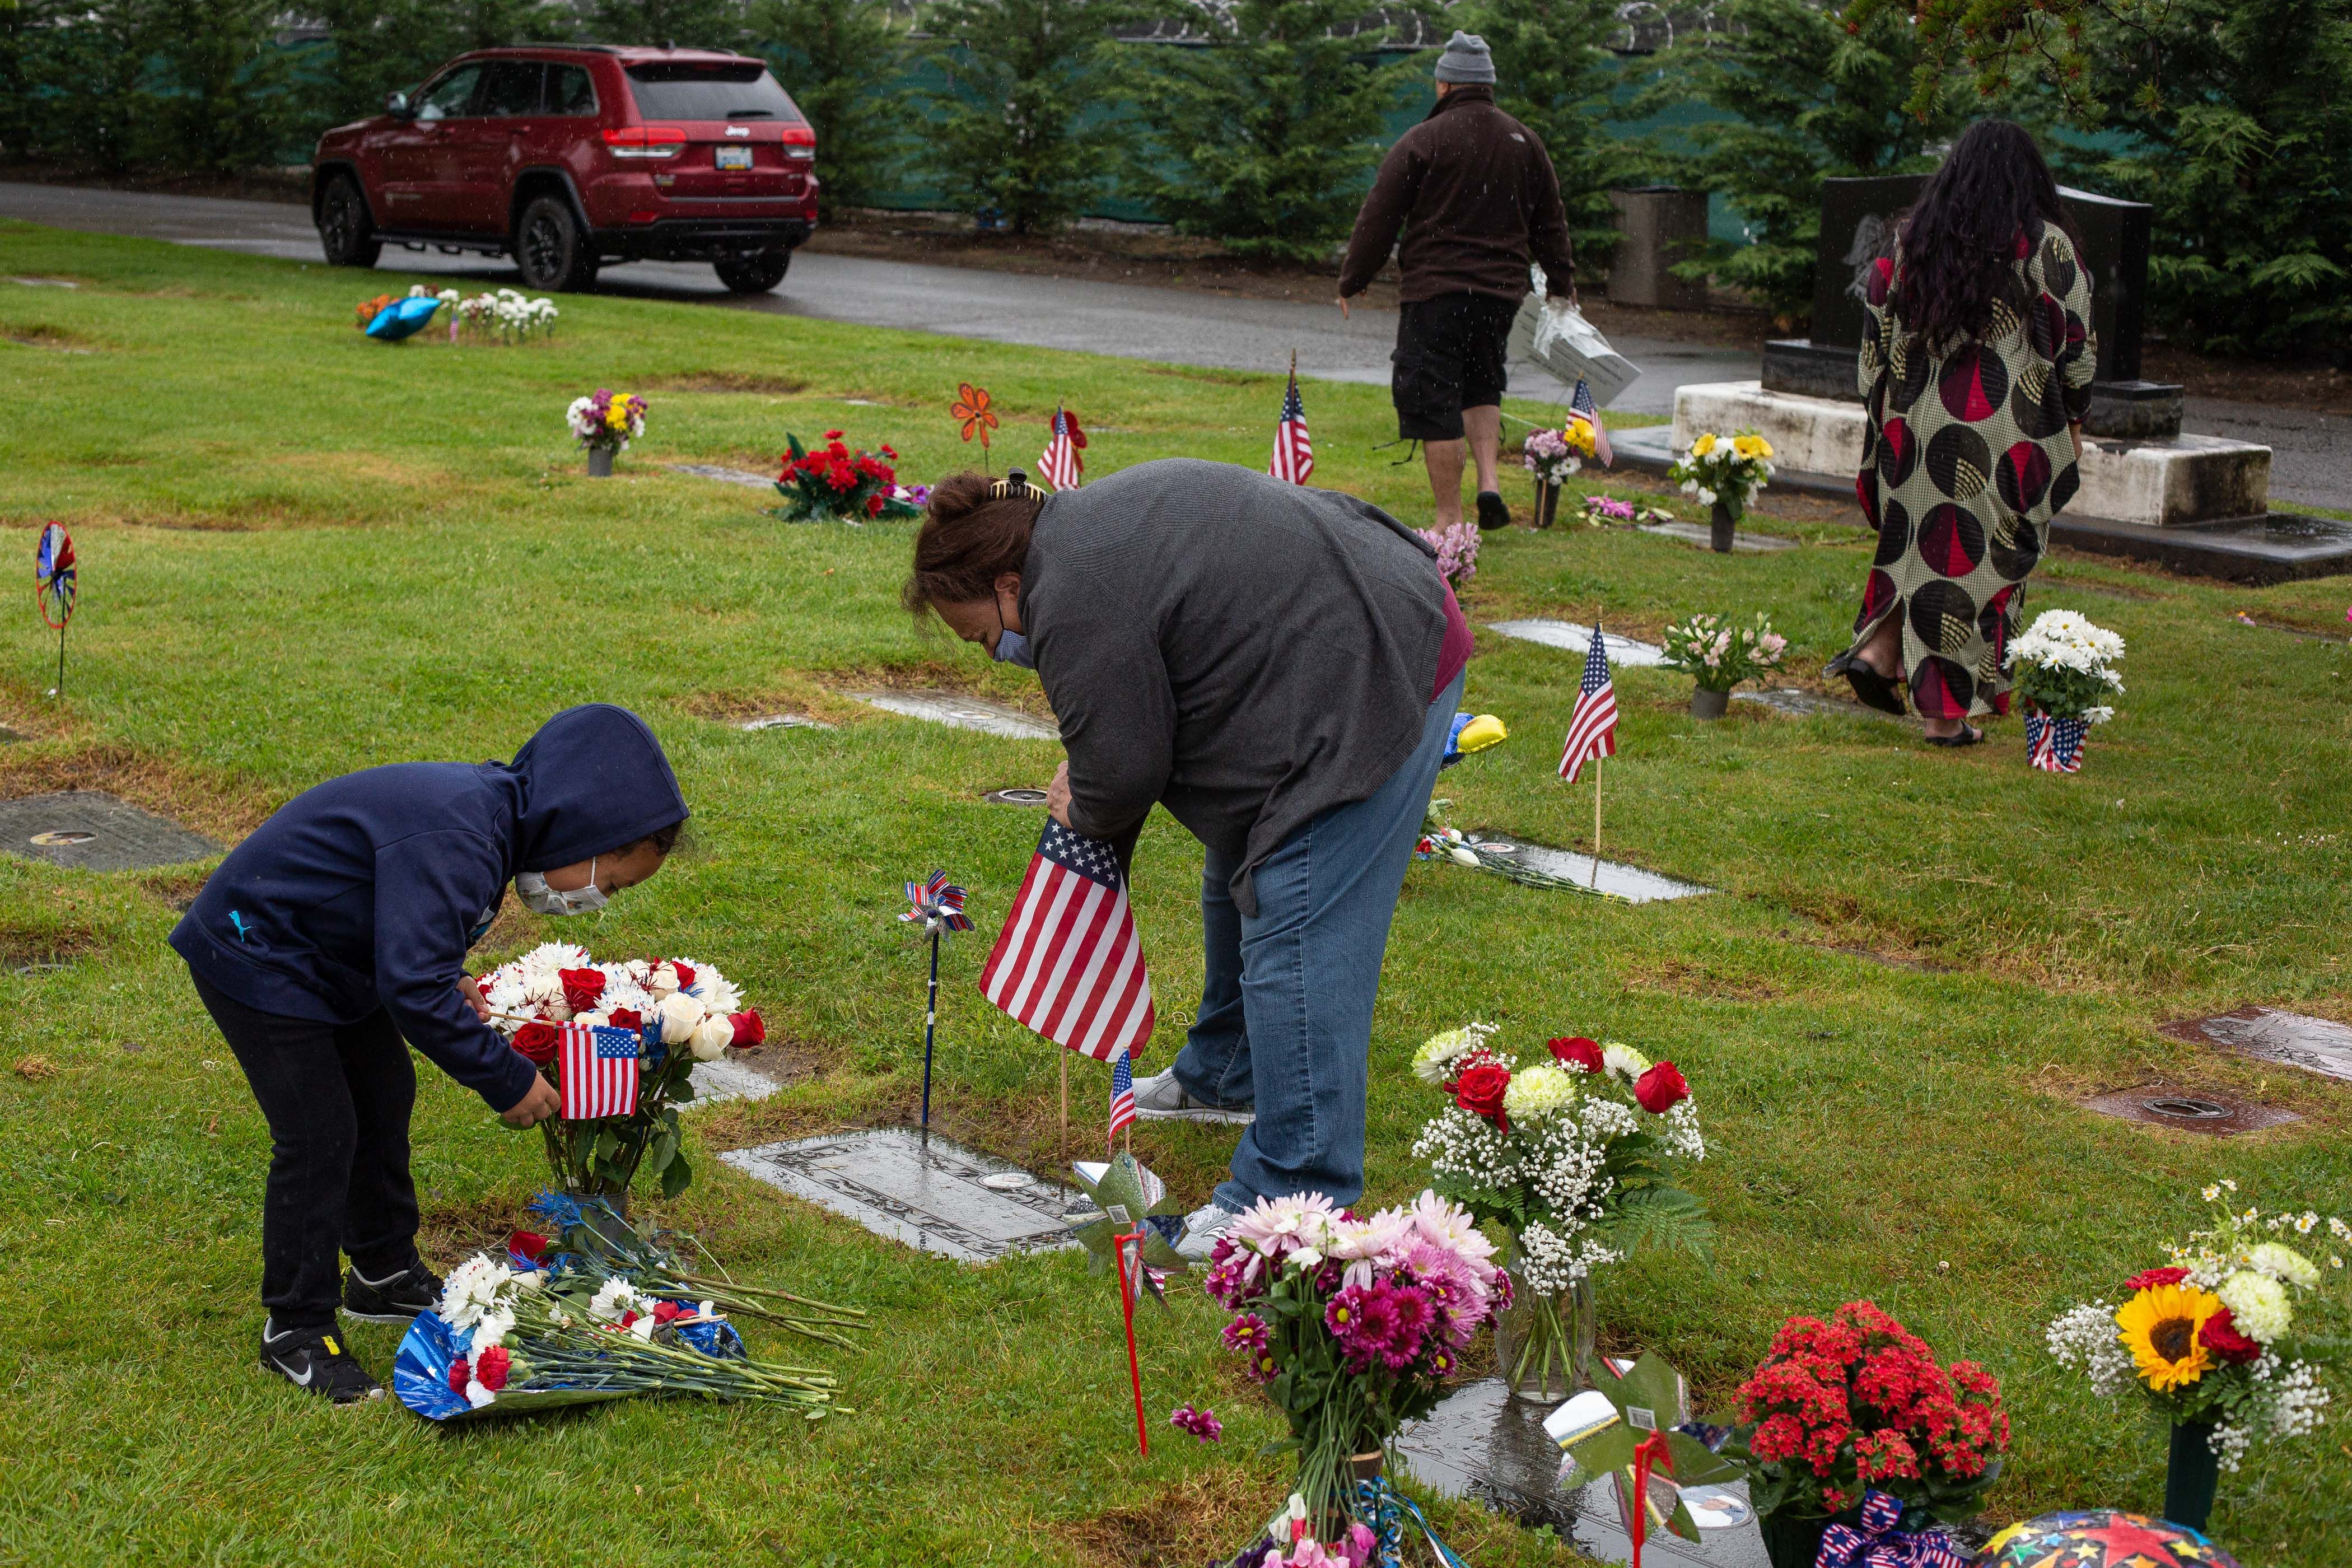 Decorating grave sites for family members on Memorial Day at Washington Memorial Park on May 25